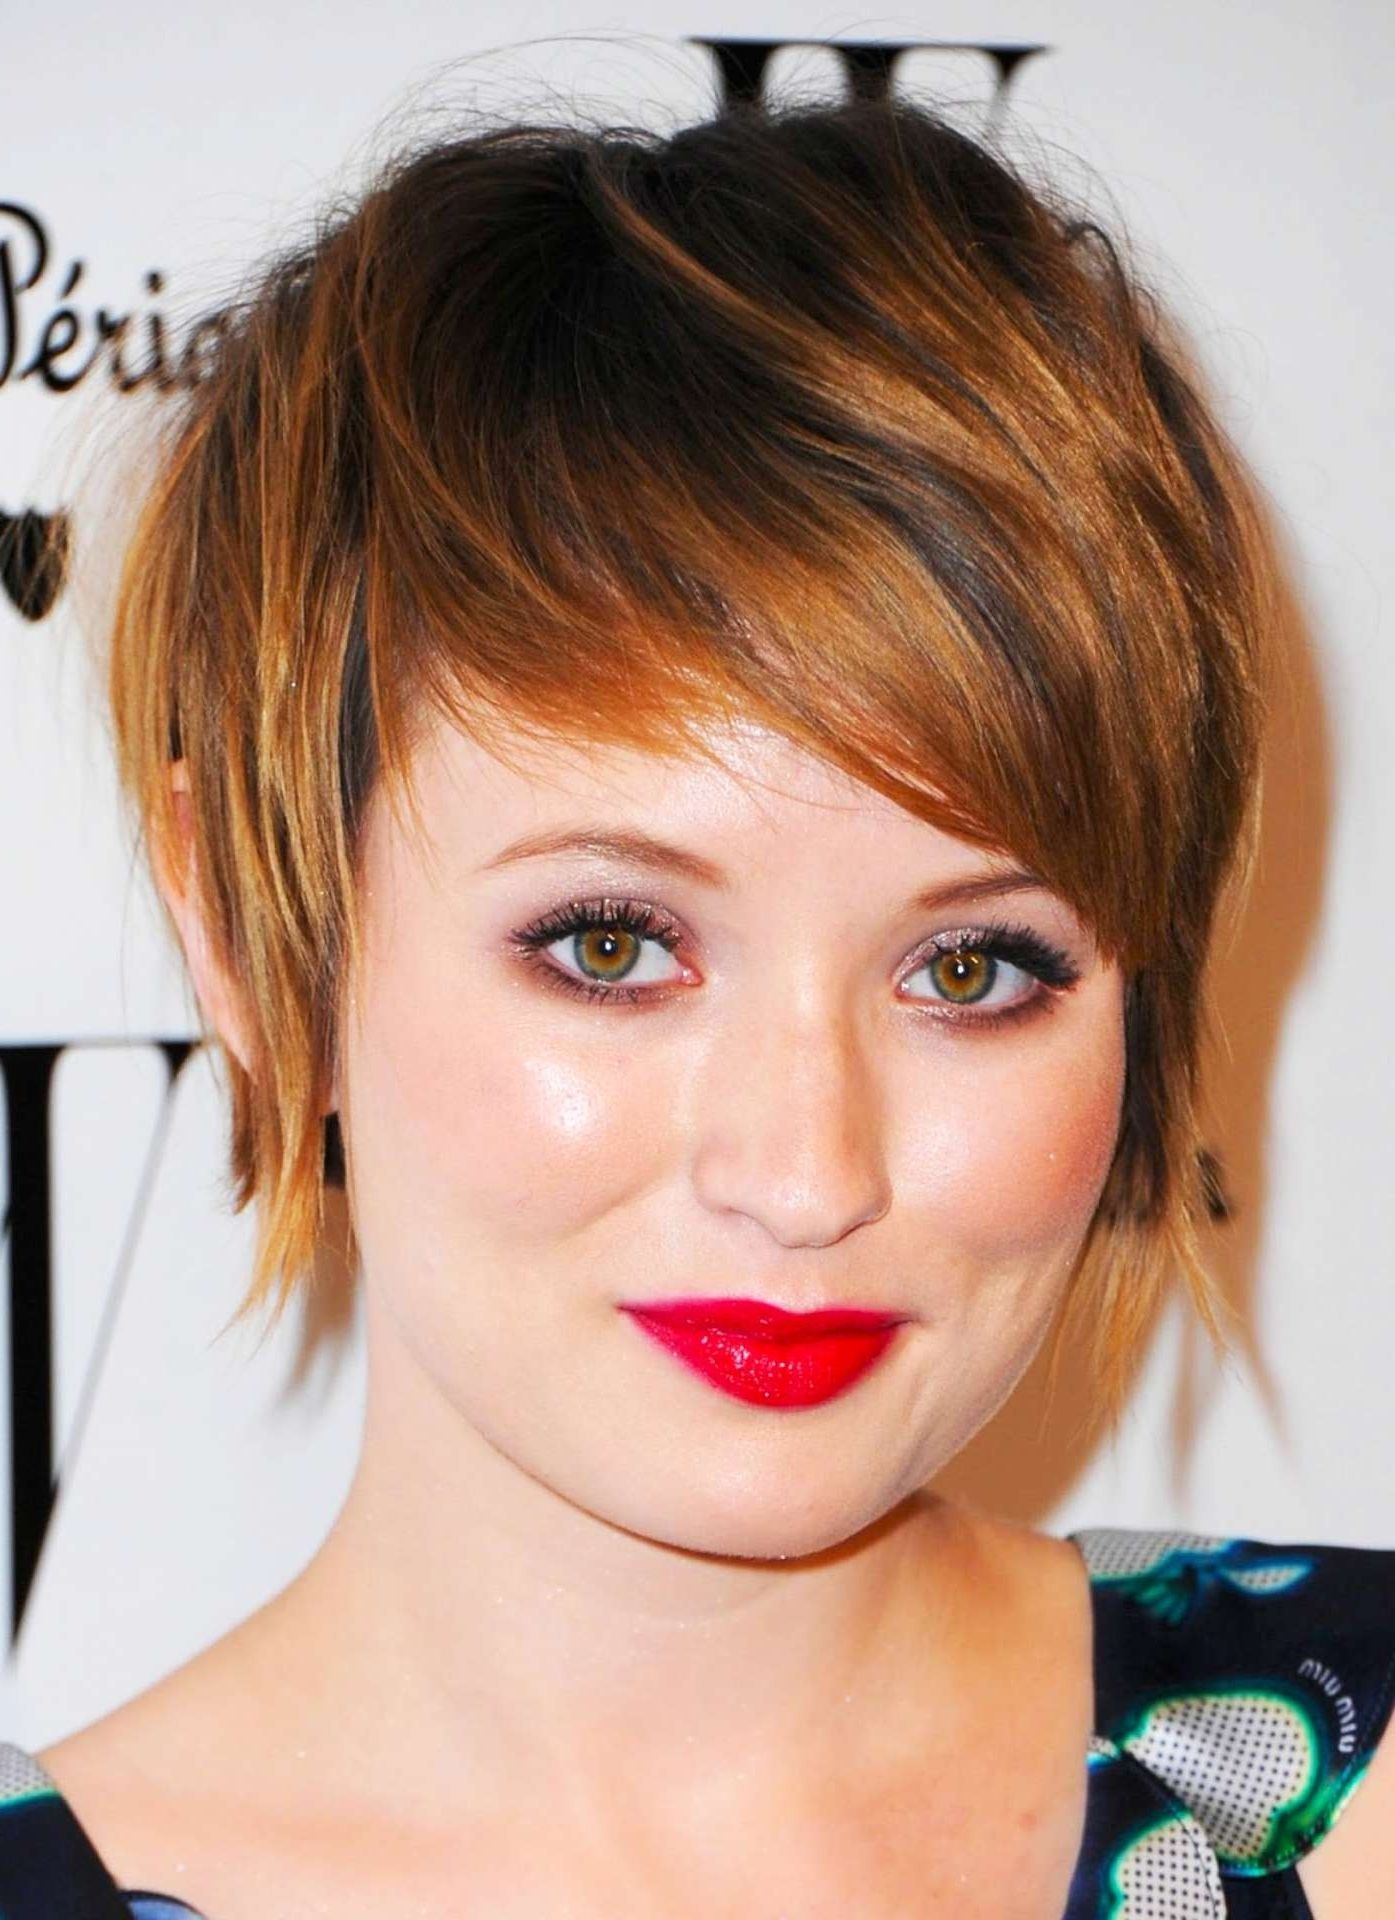 Best Short Hairstyles For Fuller Faces Images – Styles & Ideas In Most Current Pixie Hairstyles For Chubby Faces (View 2 of 15)